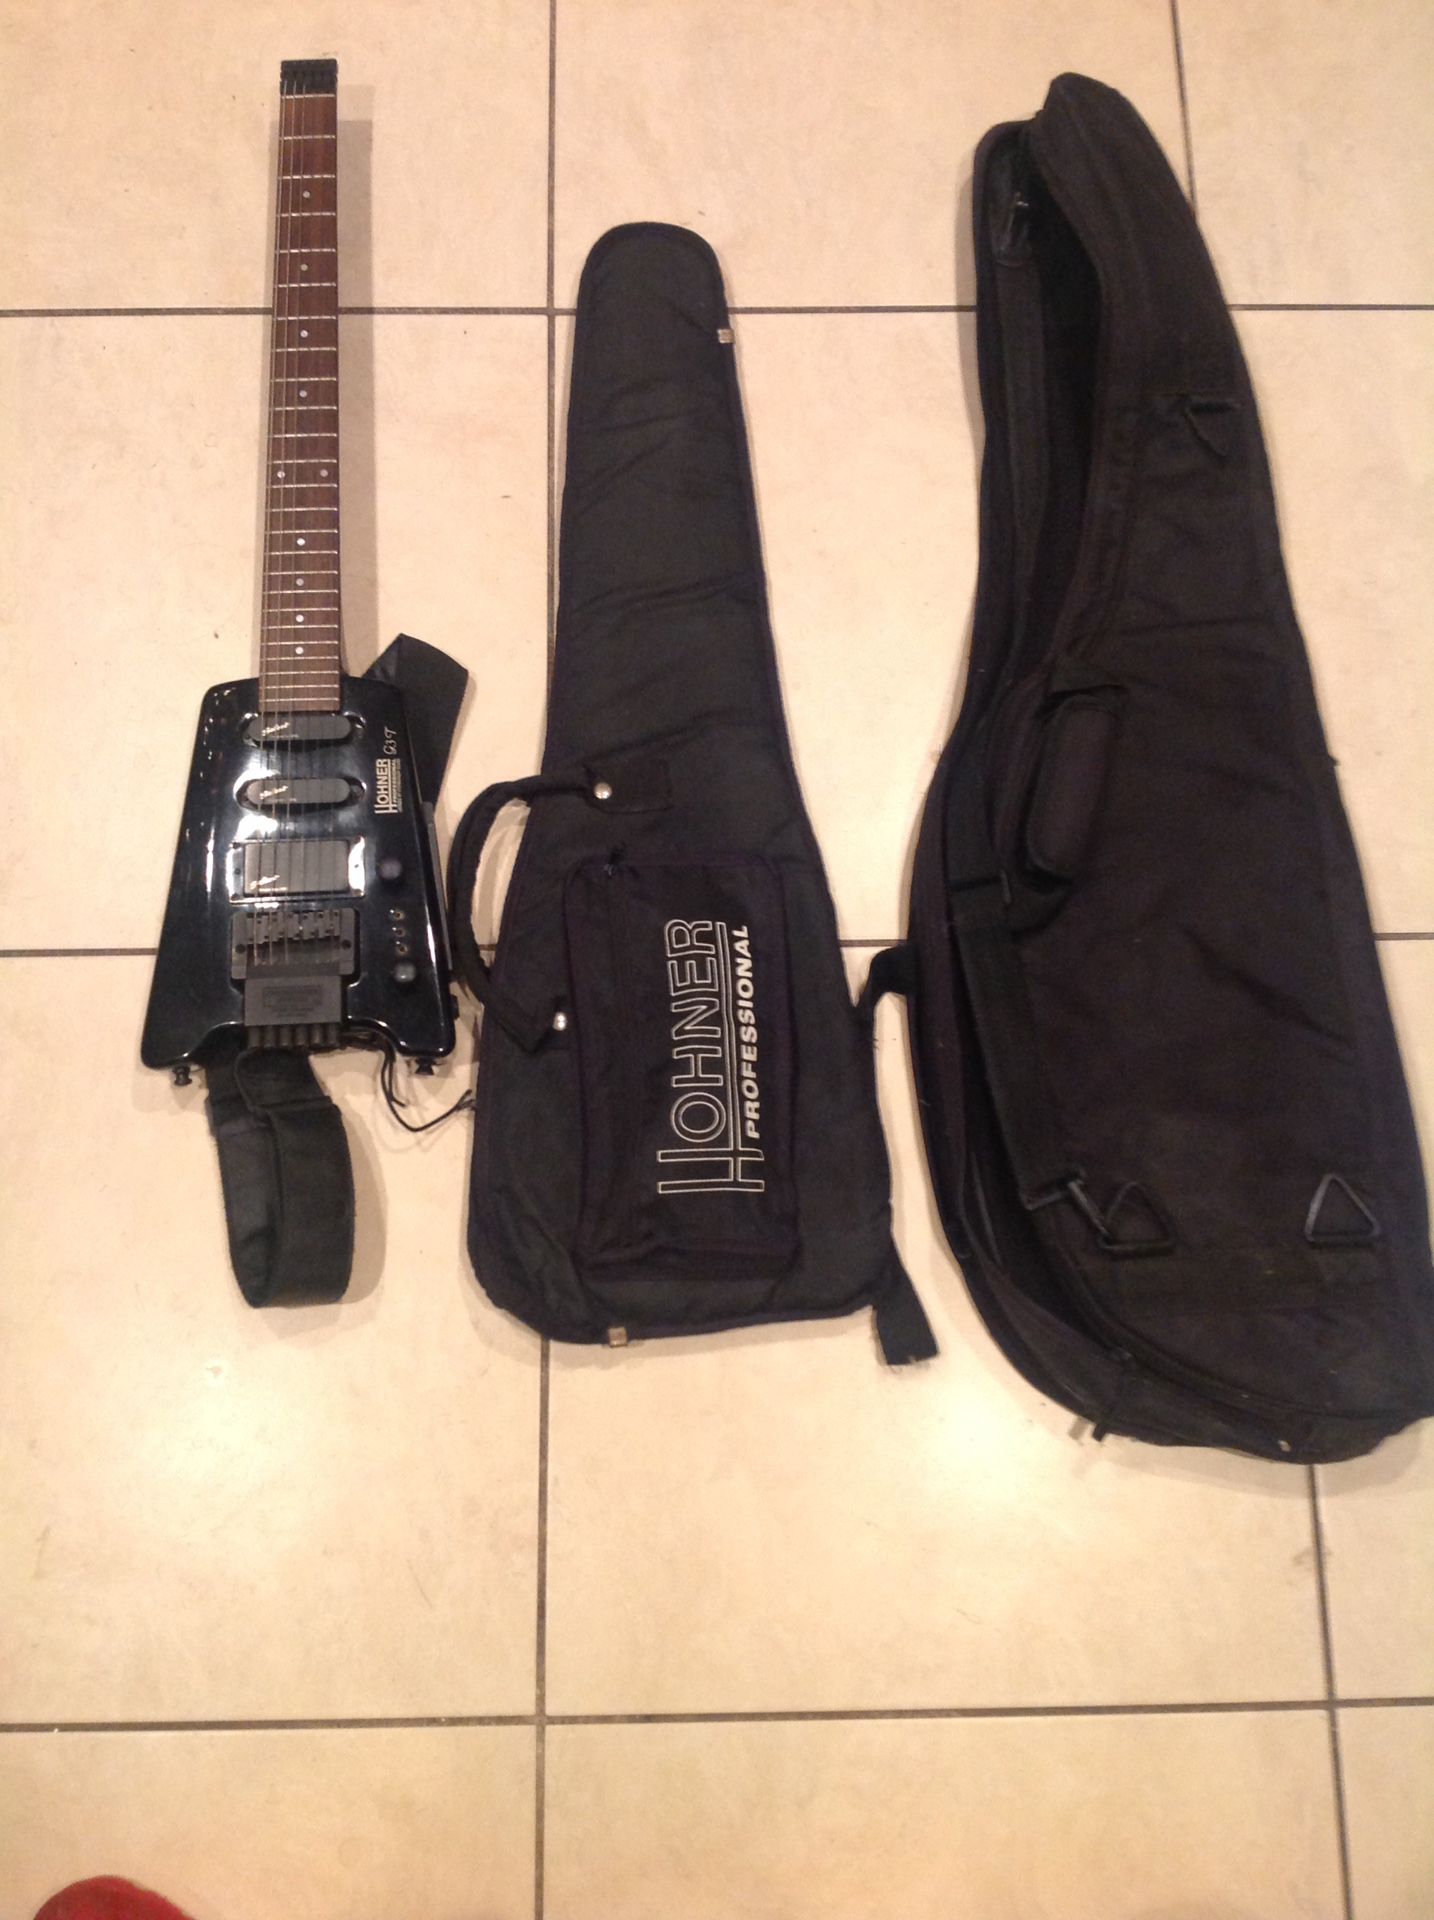 Hohner professional guitar excellent working order